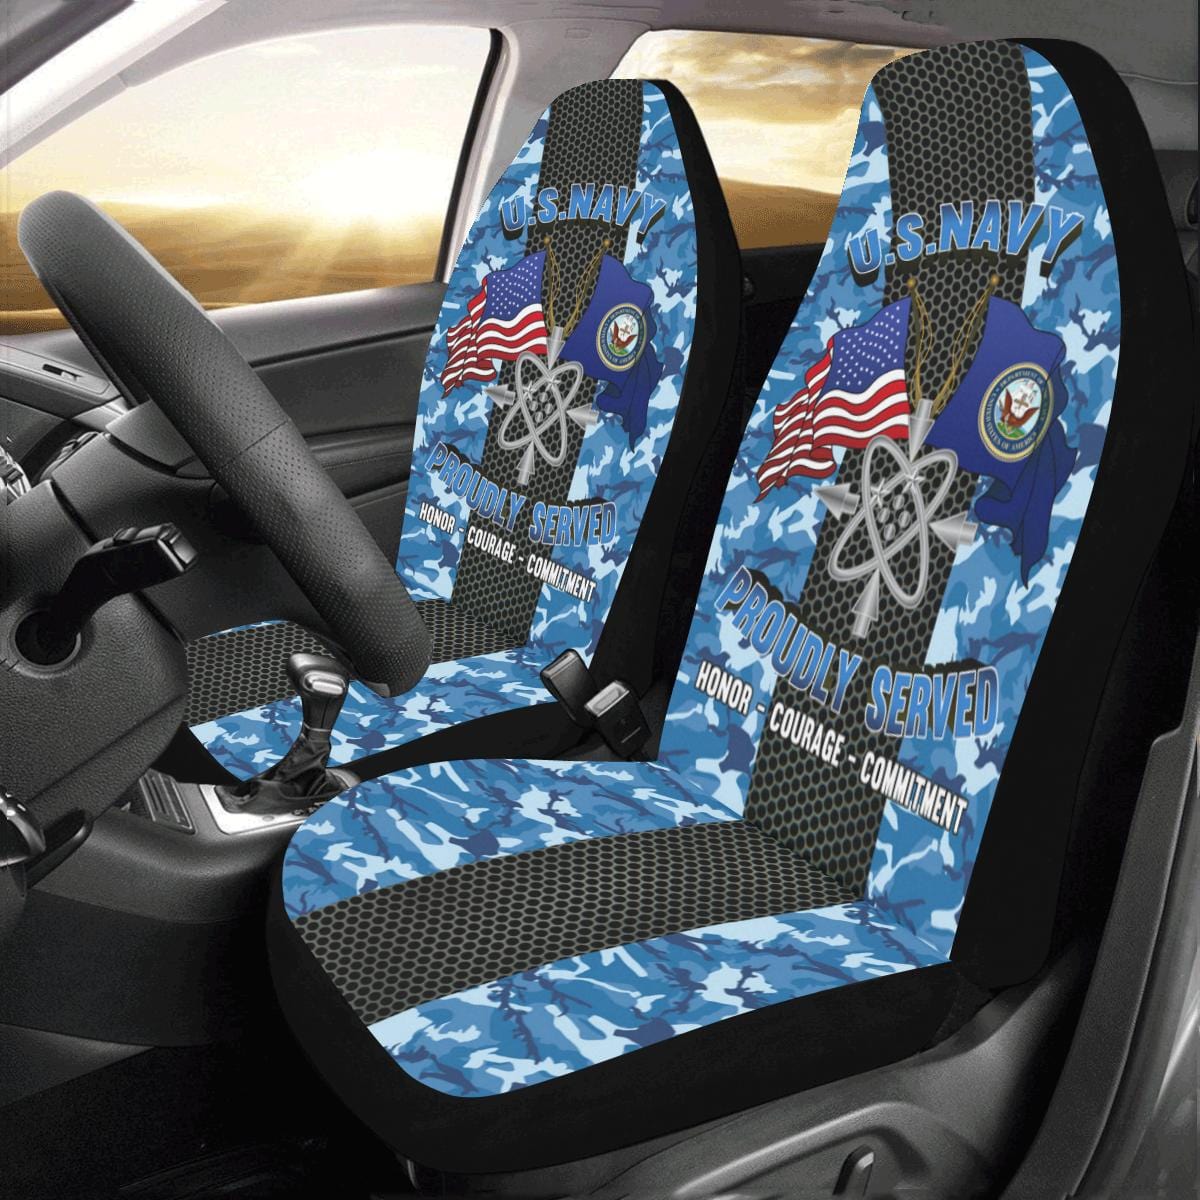 U.S Navy Data systems technician Navy DS Car Seat Covers (Set of 2)-SeatCovers-Navy-Rate-Veterans Nation